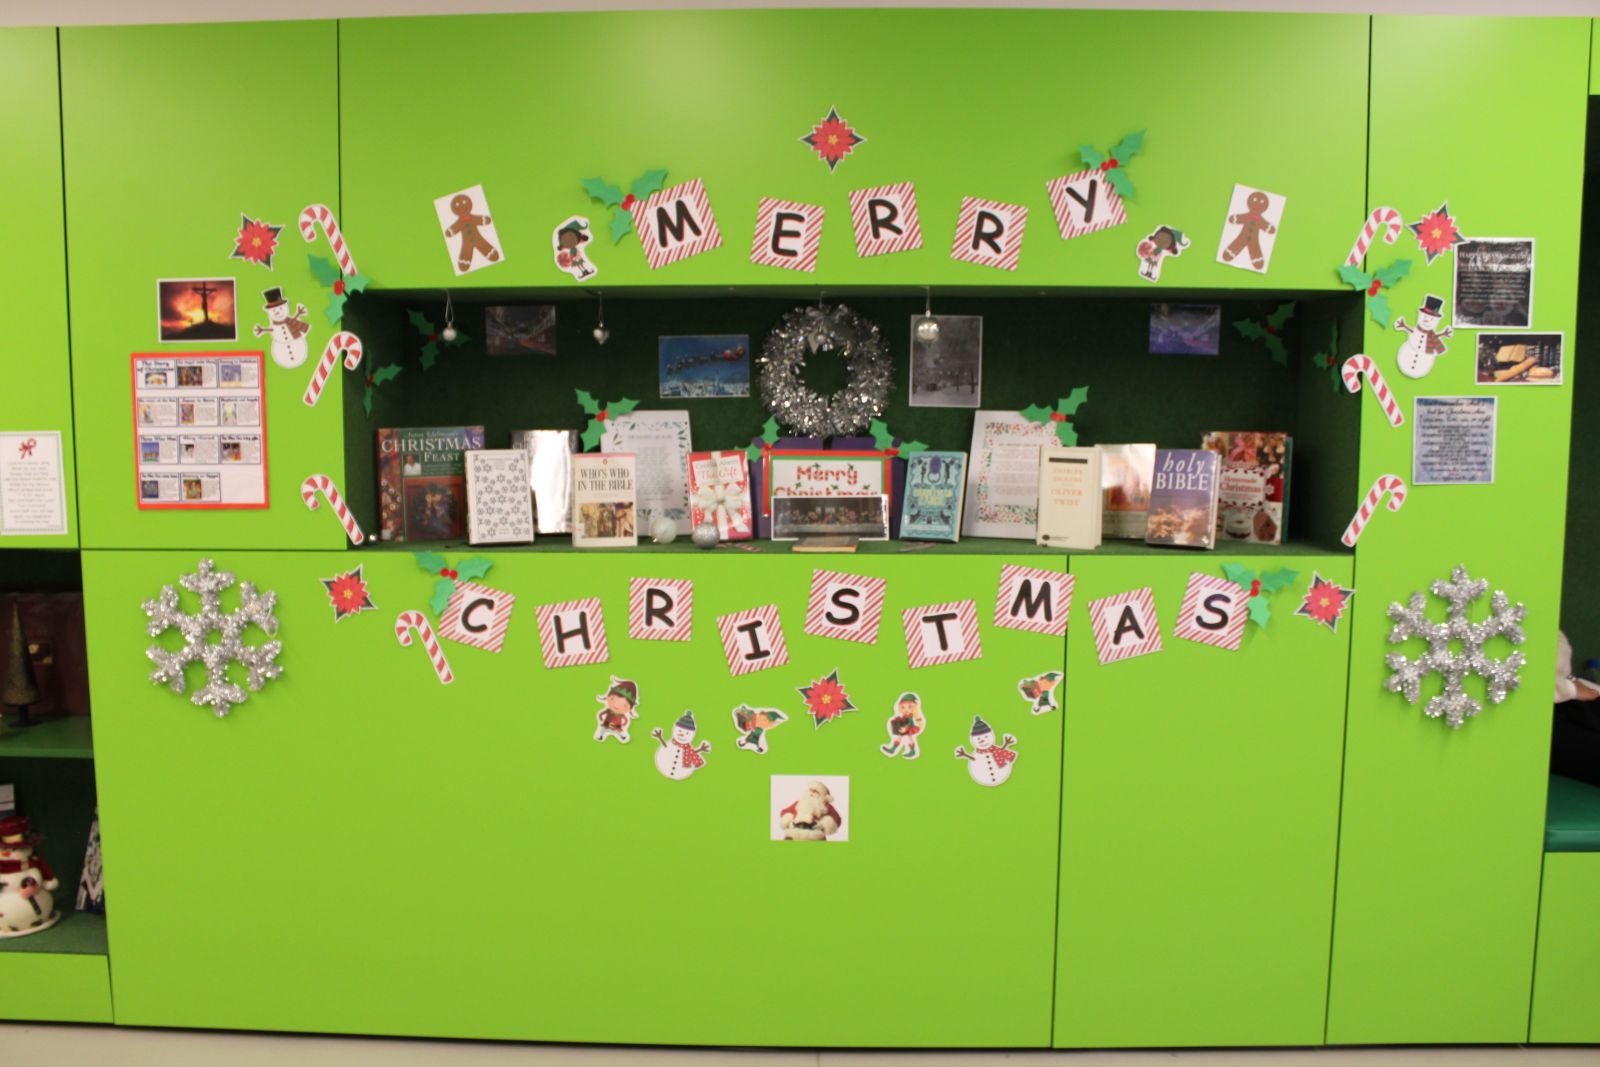 A display of books relating to Christmas